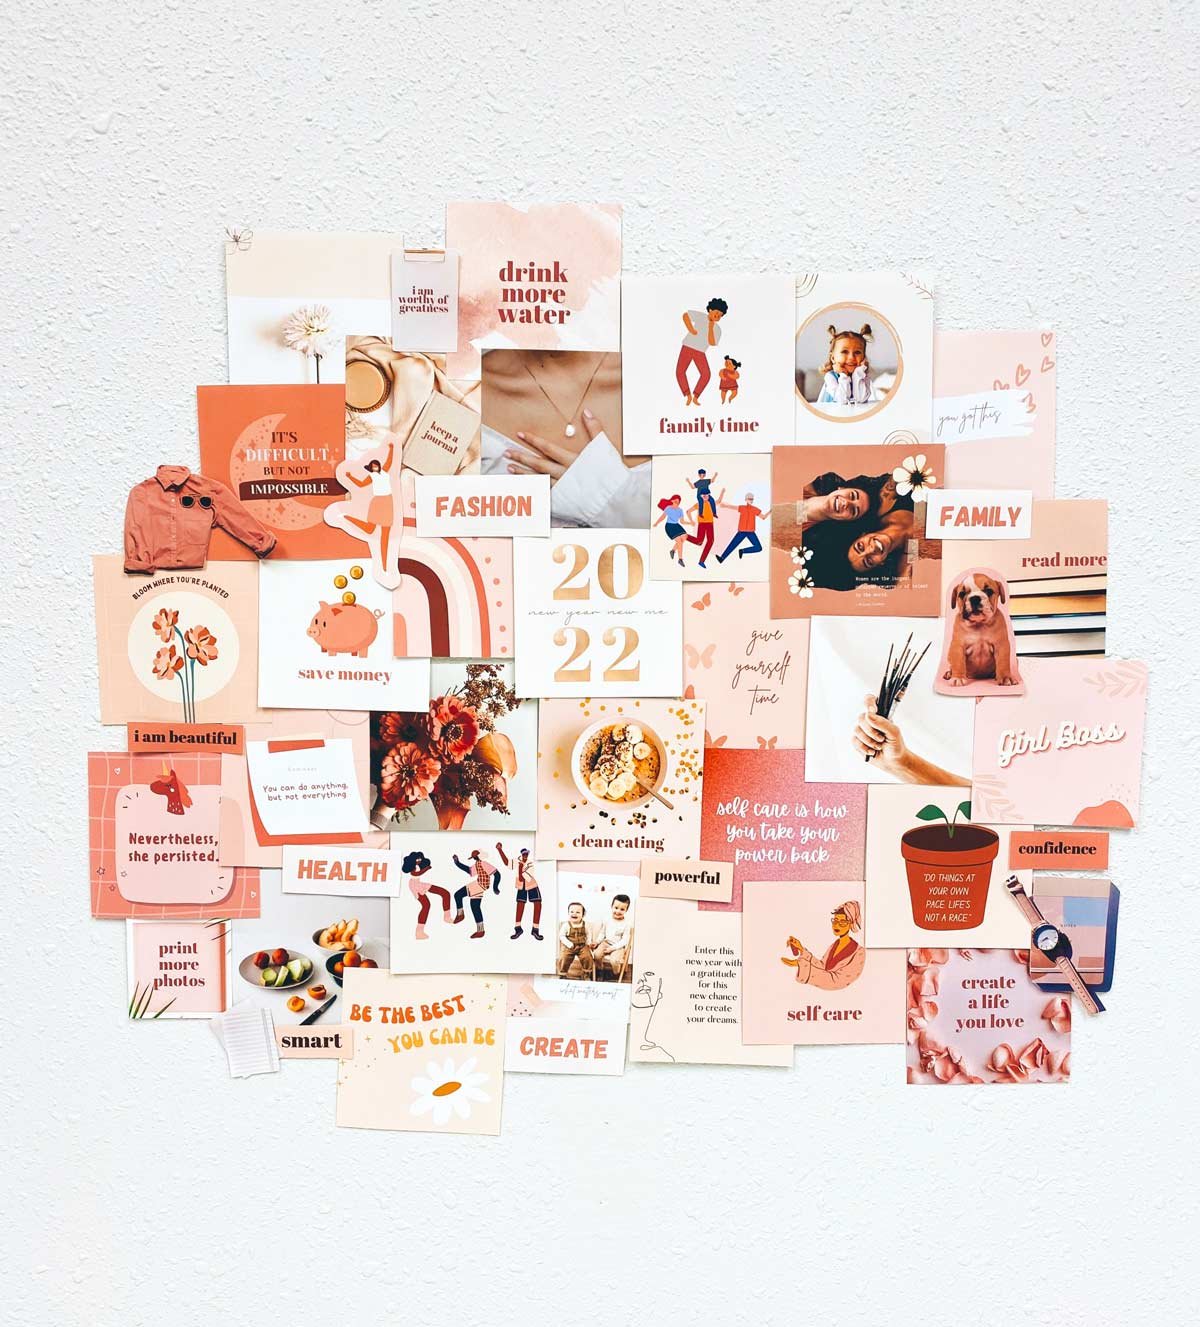 Tips For Crafting The Ultimate Vision Board To Bring Your Dreams To Life